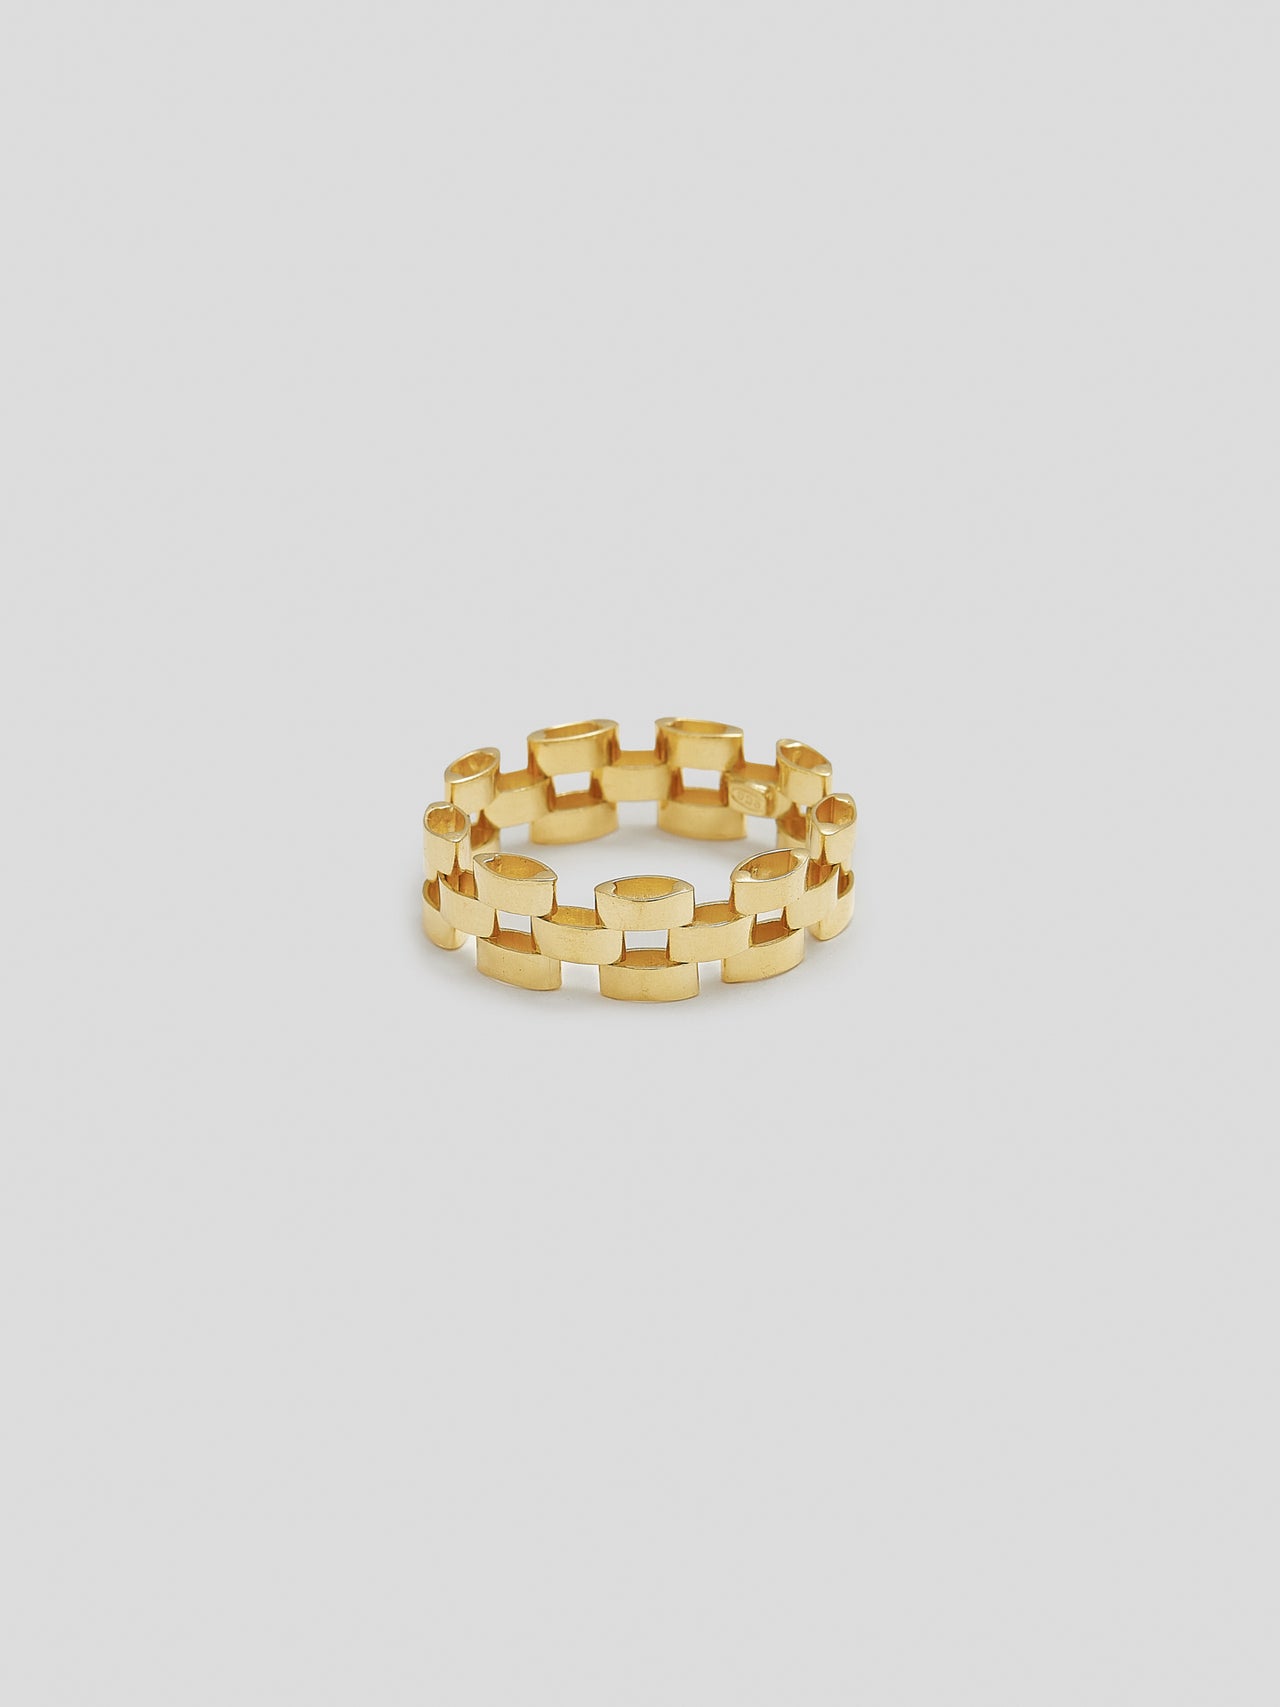 Product images of the Blitz Ring ( Vermeil GoldChain Ring 6mm Wide 2.5mm Thick) Background: Grey Backdrop